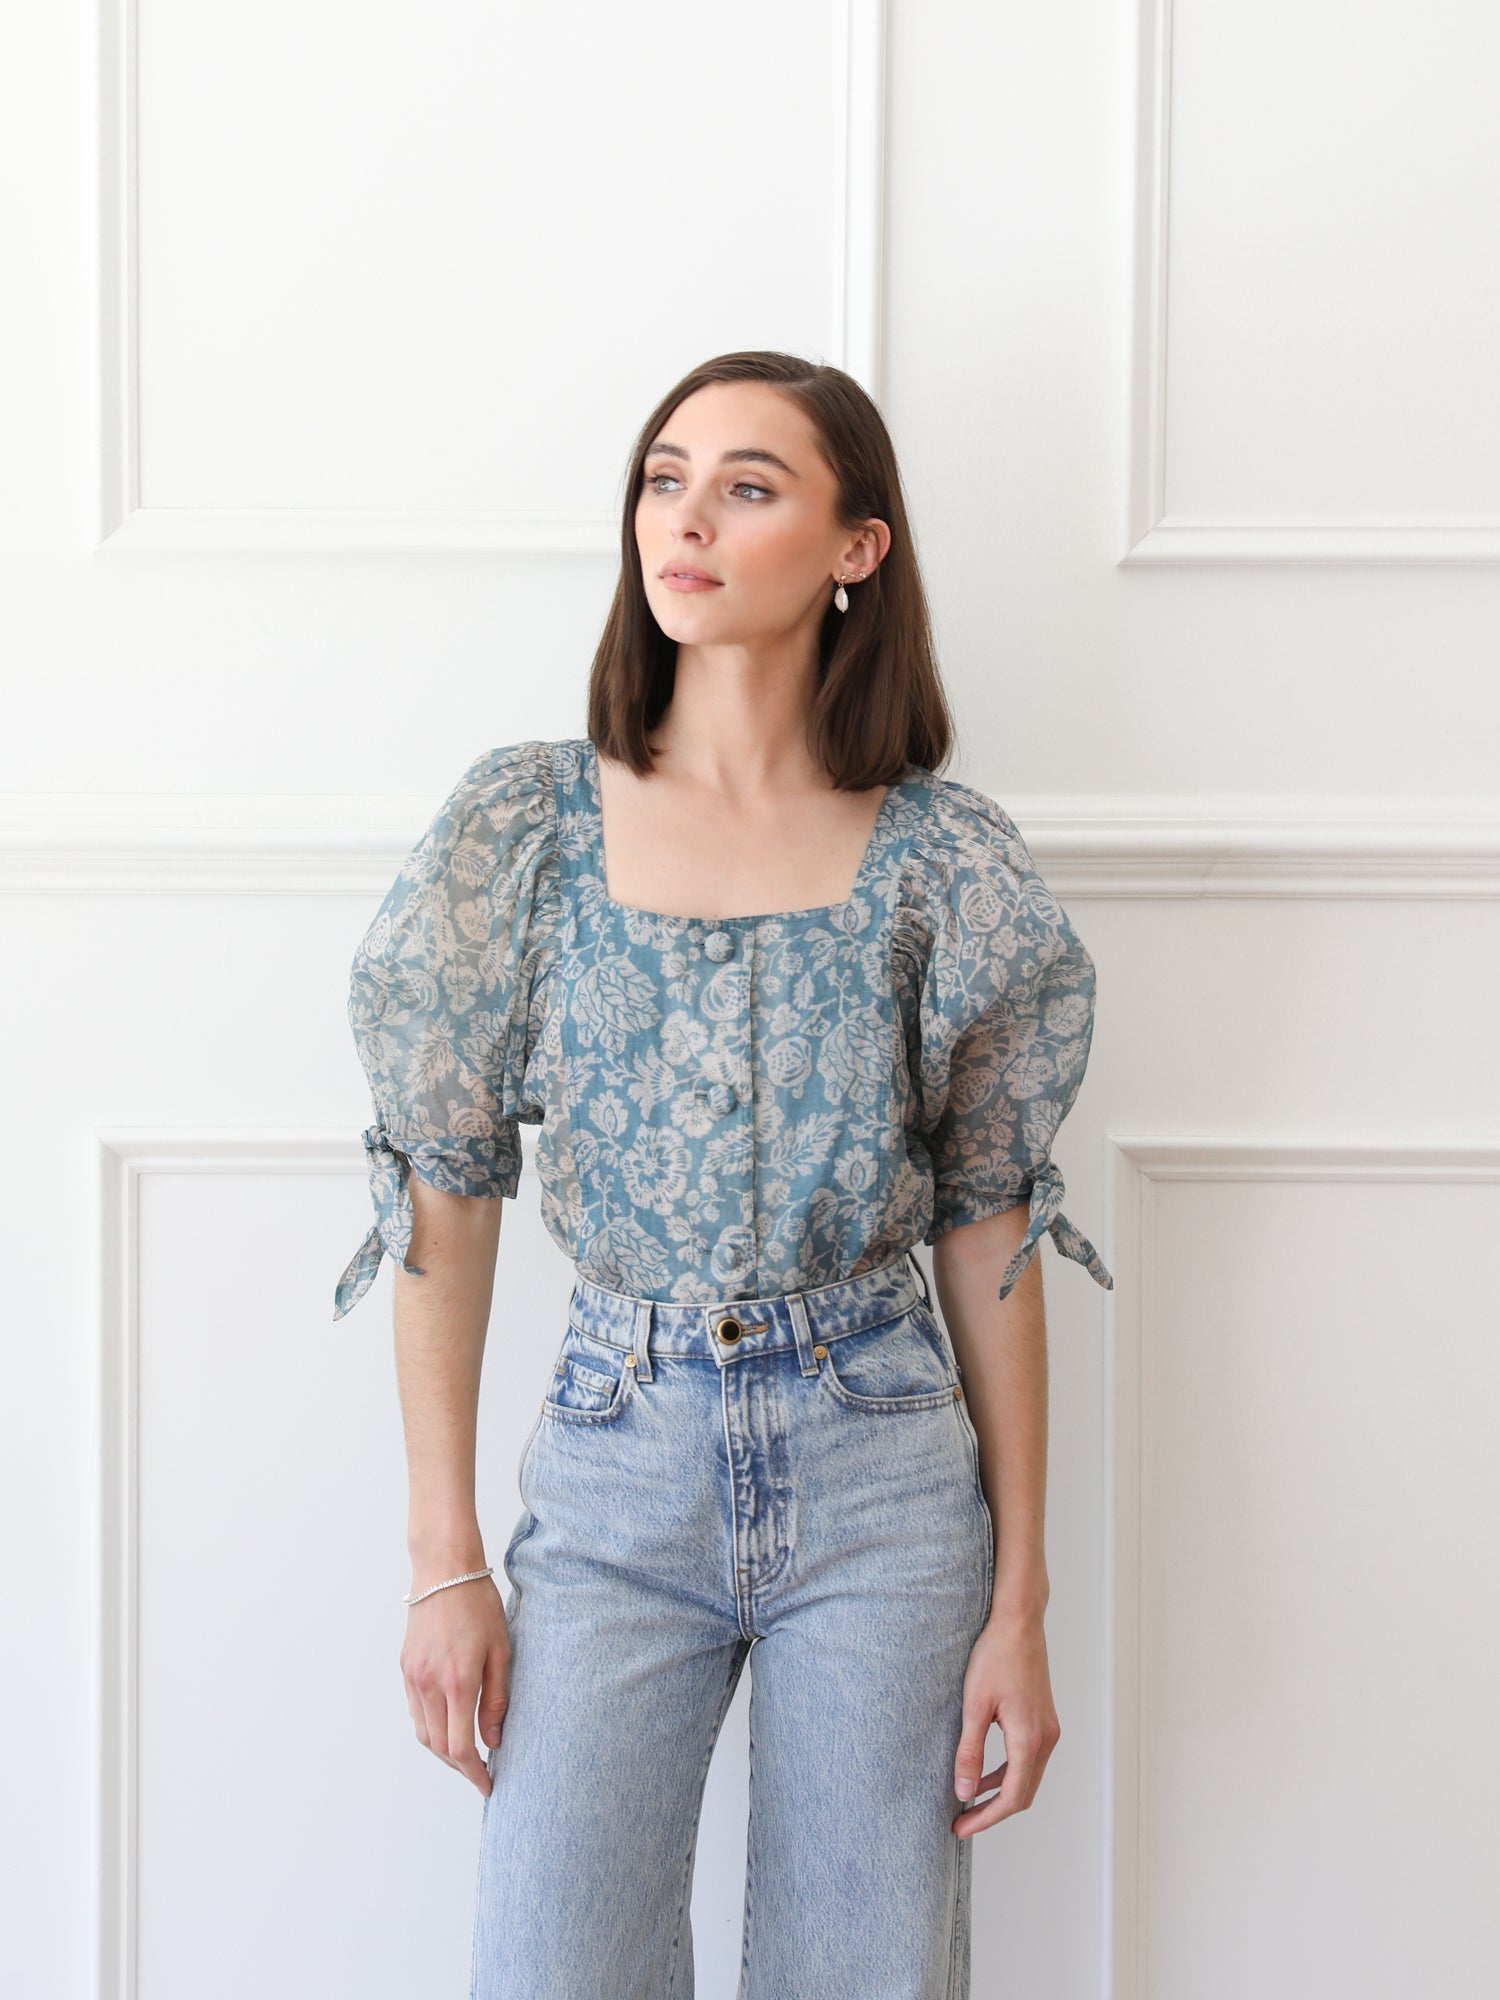 MILLE Clothing Alma Top in Blue Mist